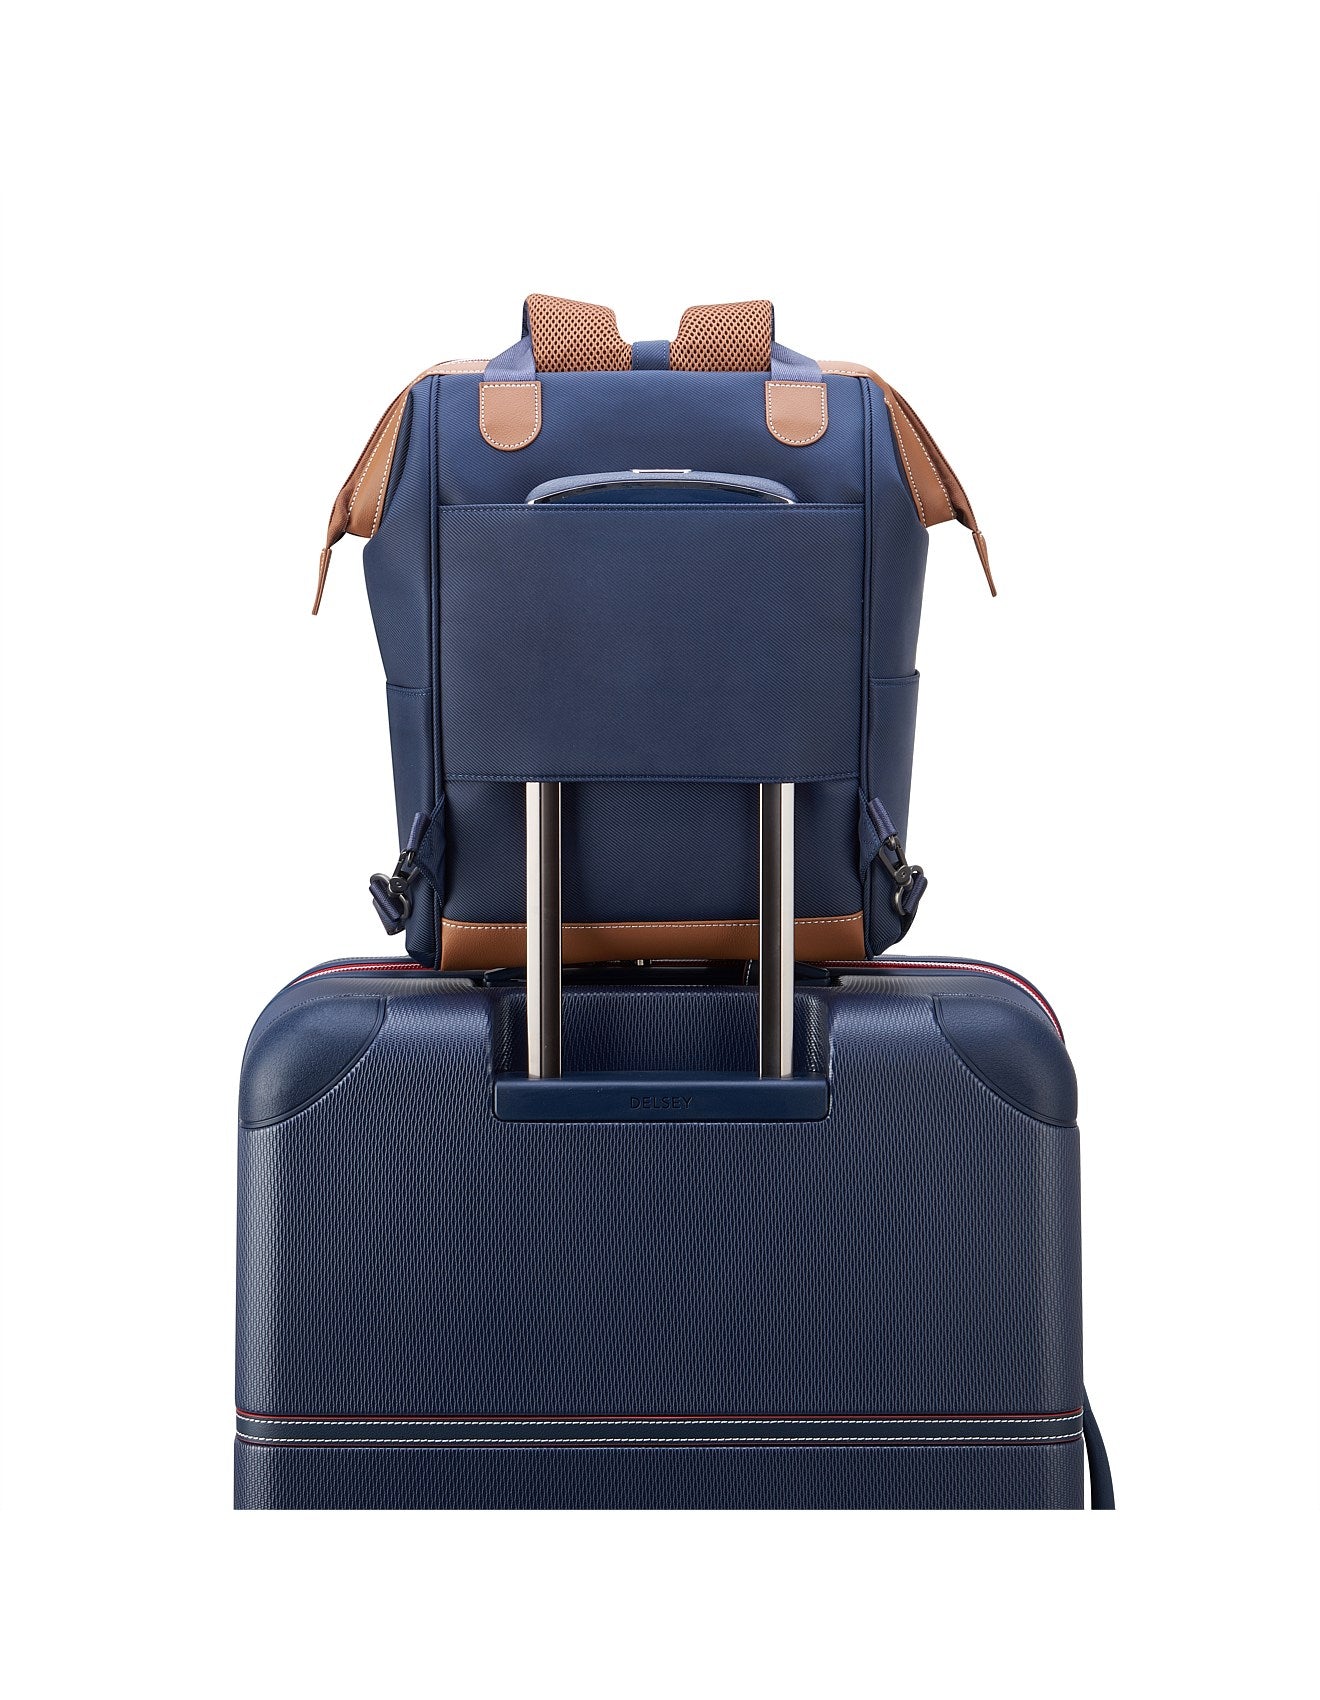 DELSEY CHATELET AIR 2.0 TOTEPACK NAVY BLUE